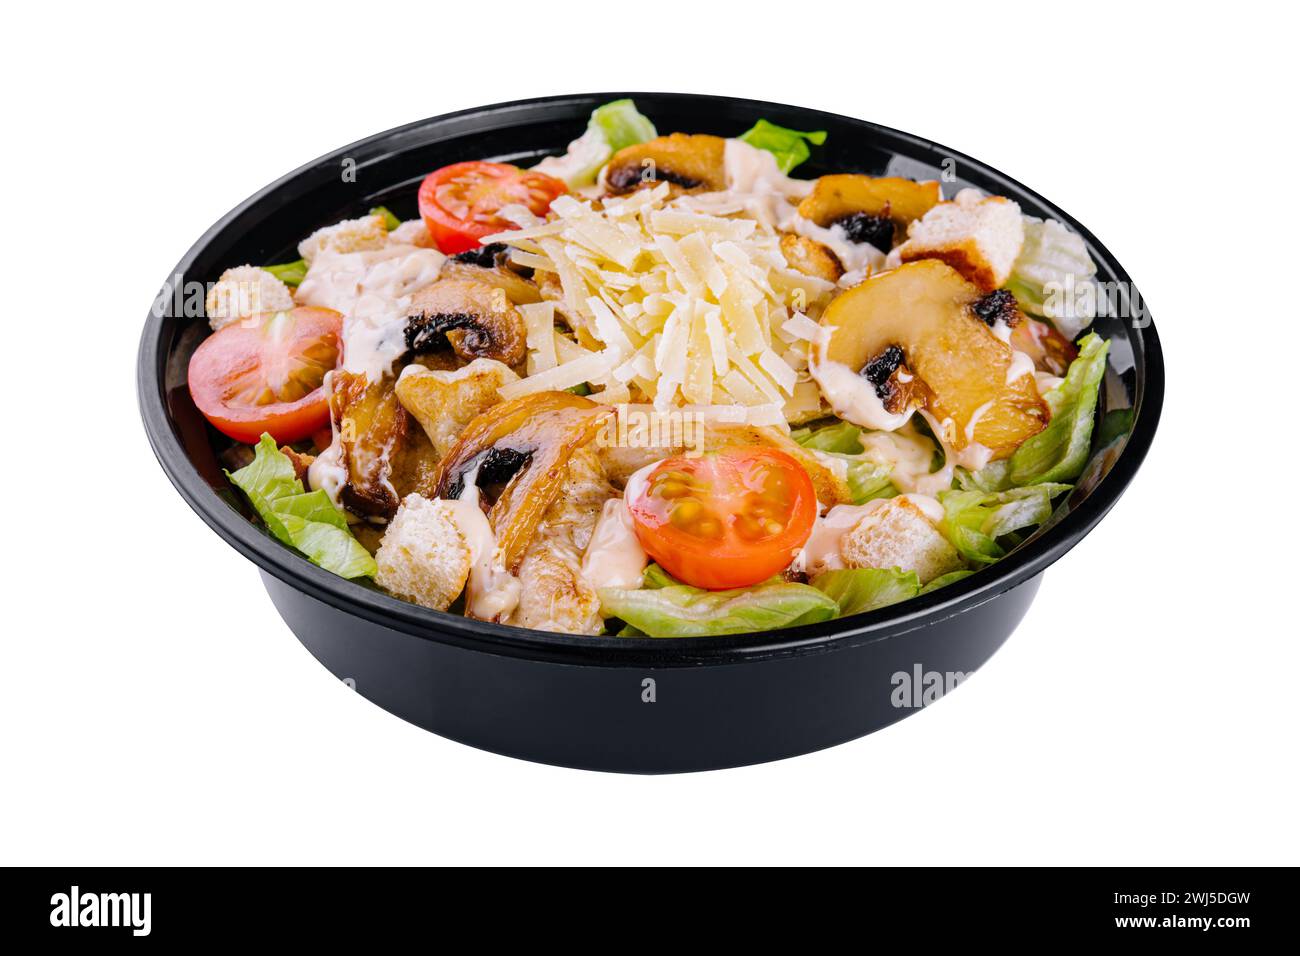 Warm salad with roasted chicken meat, vegetables and mushrooms Stock Photo